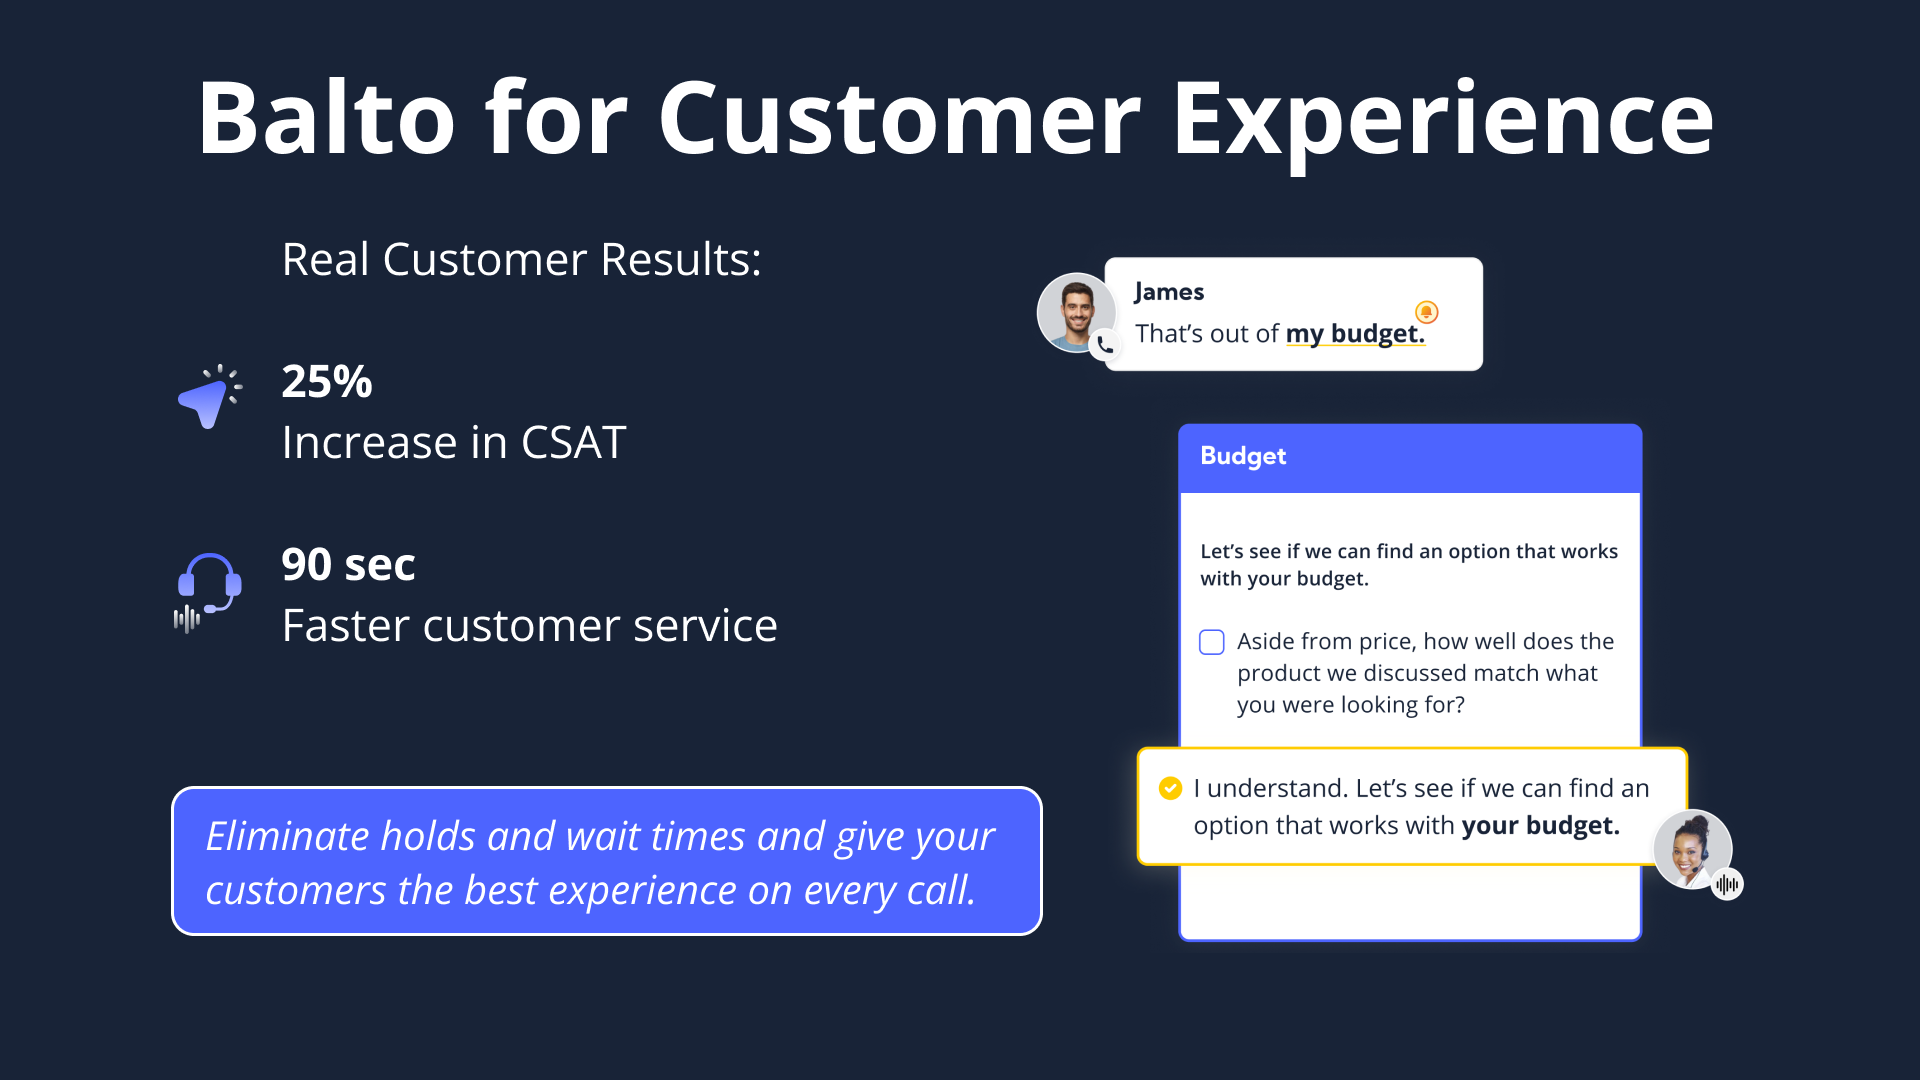 Eliminate holds and wait times and give your customers the best experience on every call.